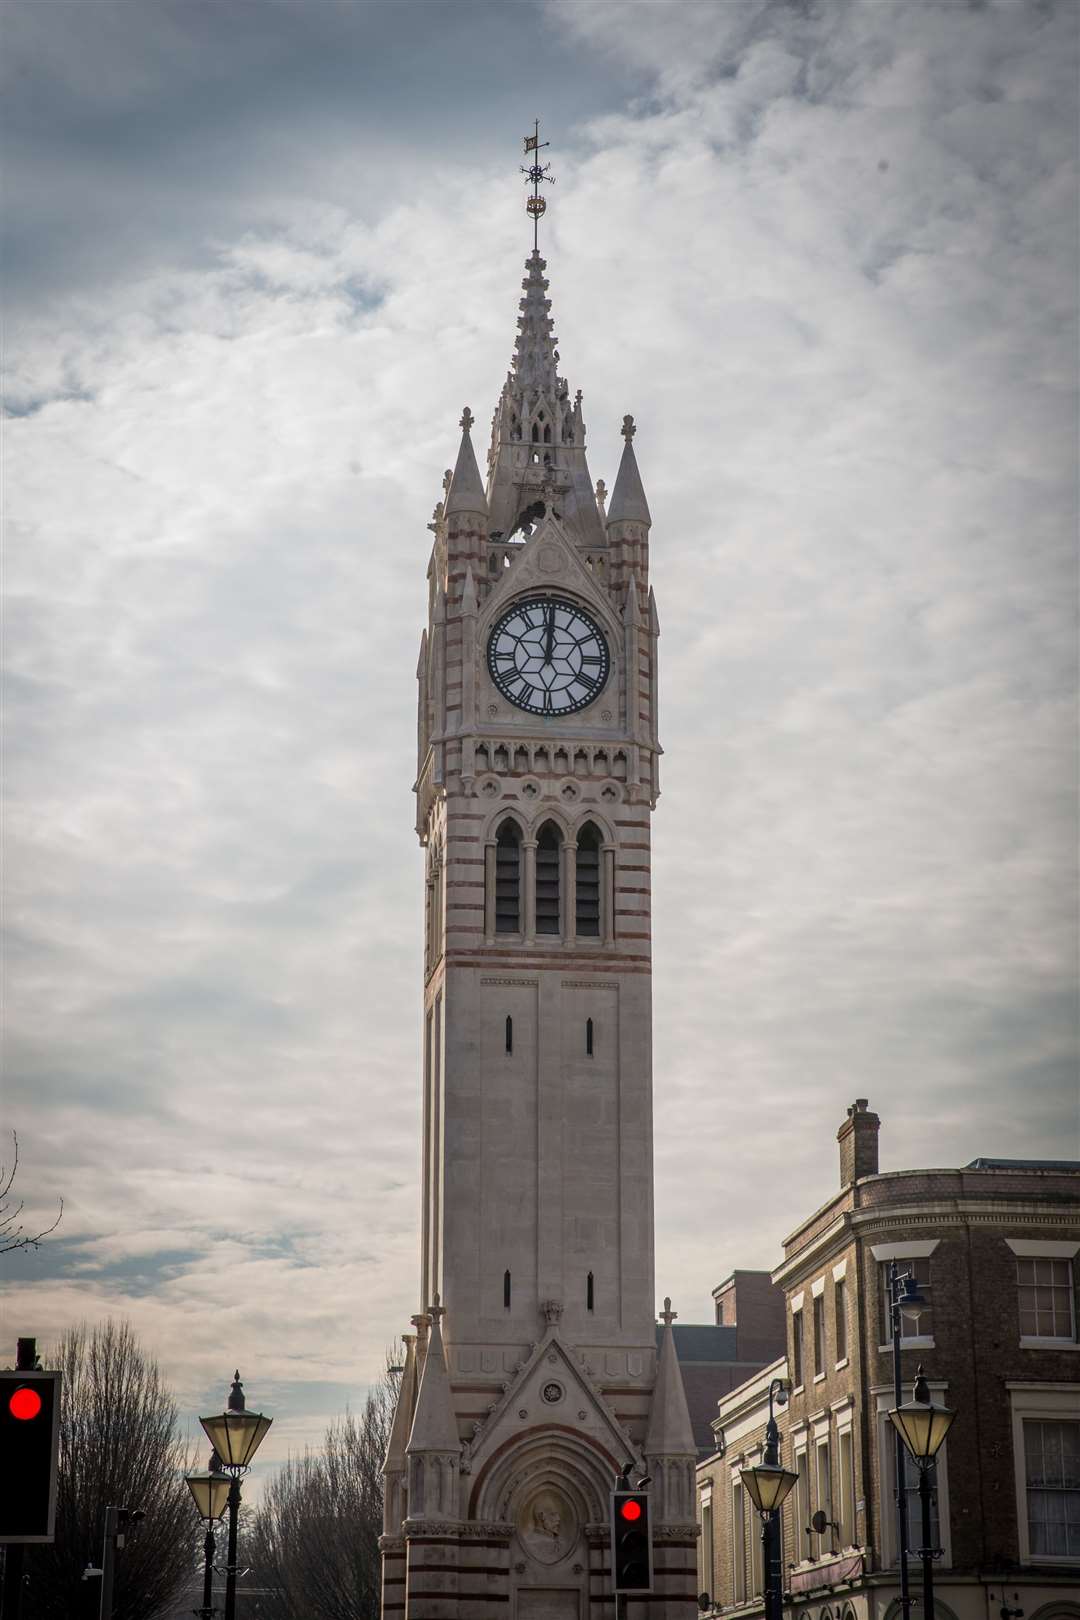 The Clock Tower at the top of Harmer Street, Gravesend